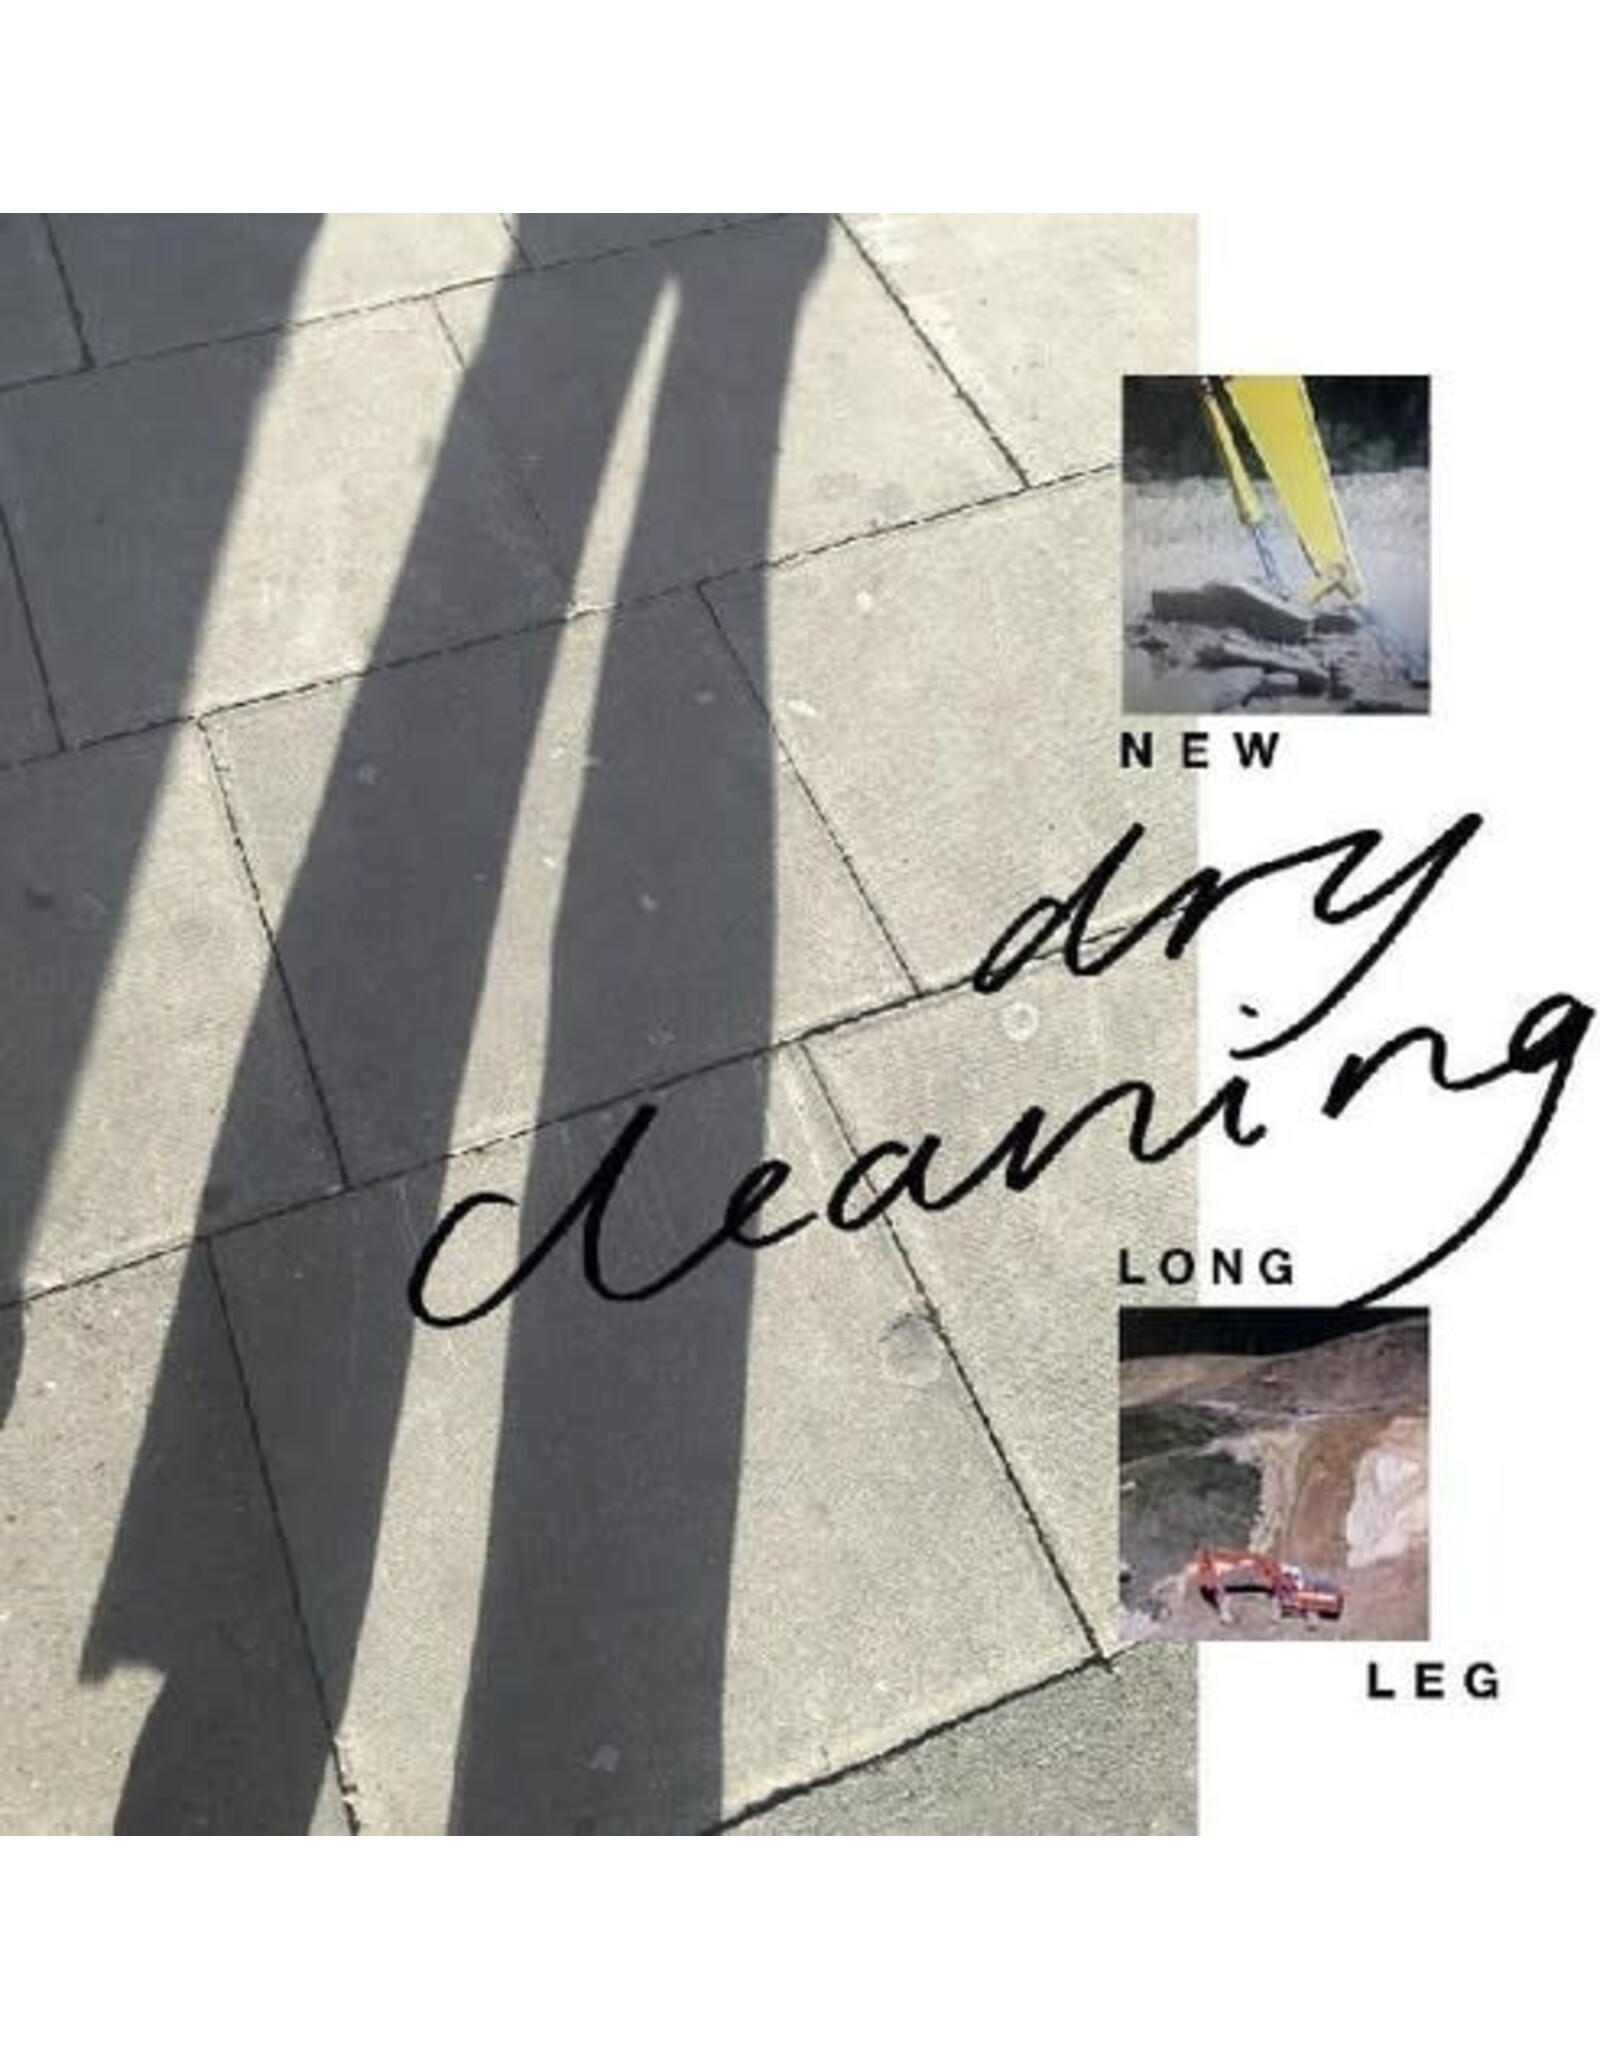 Dry Cleaning / New Long Leg